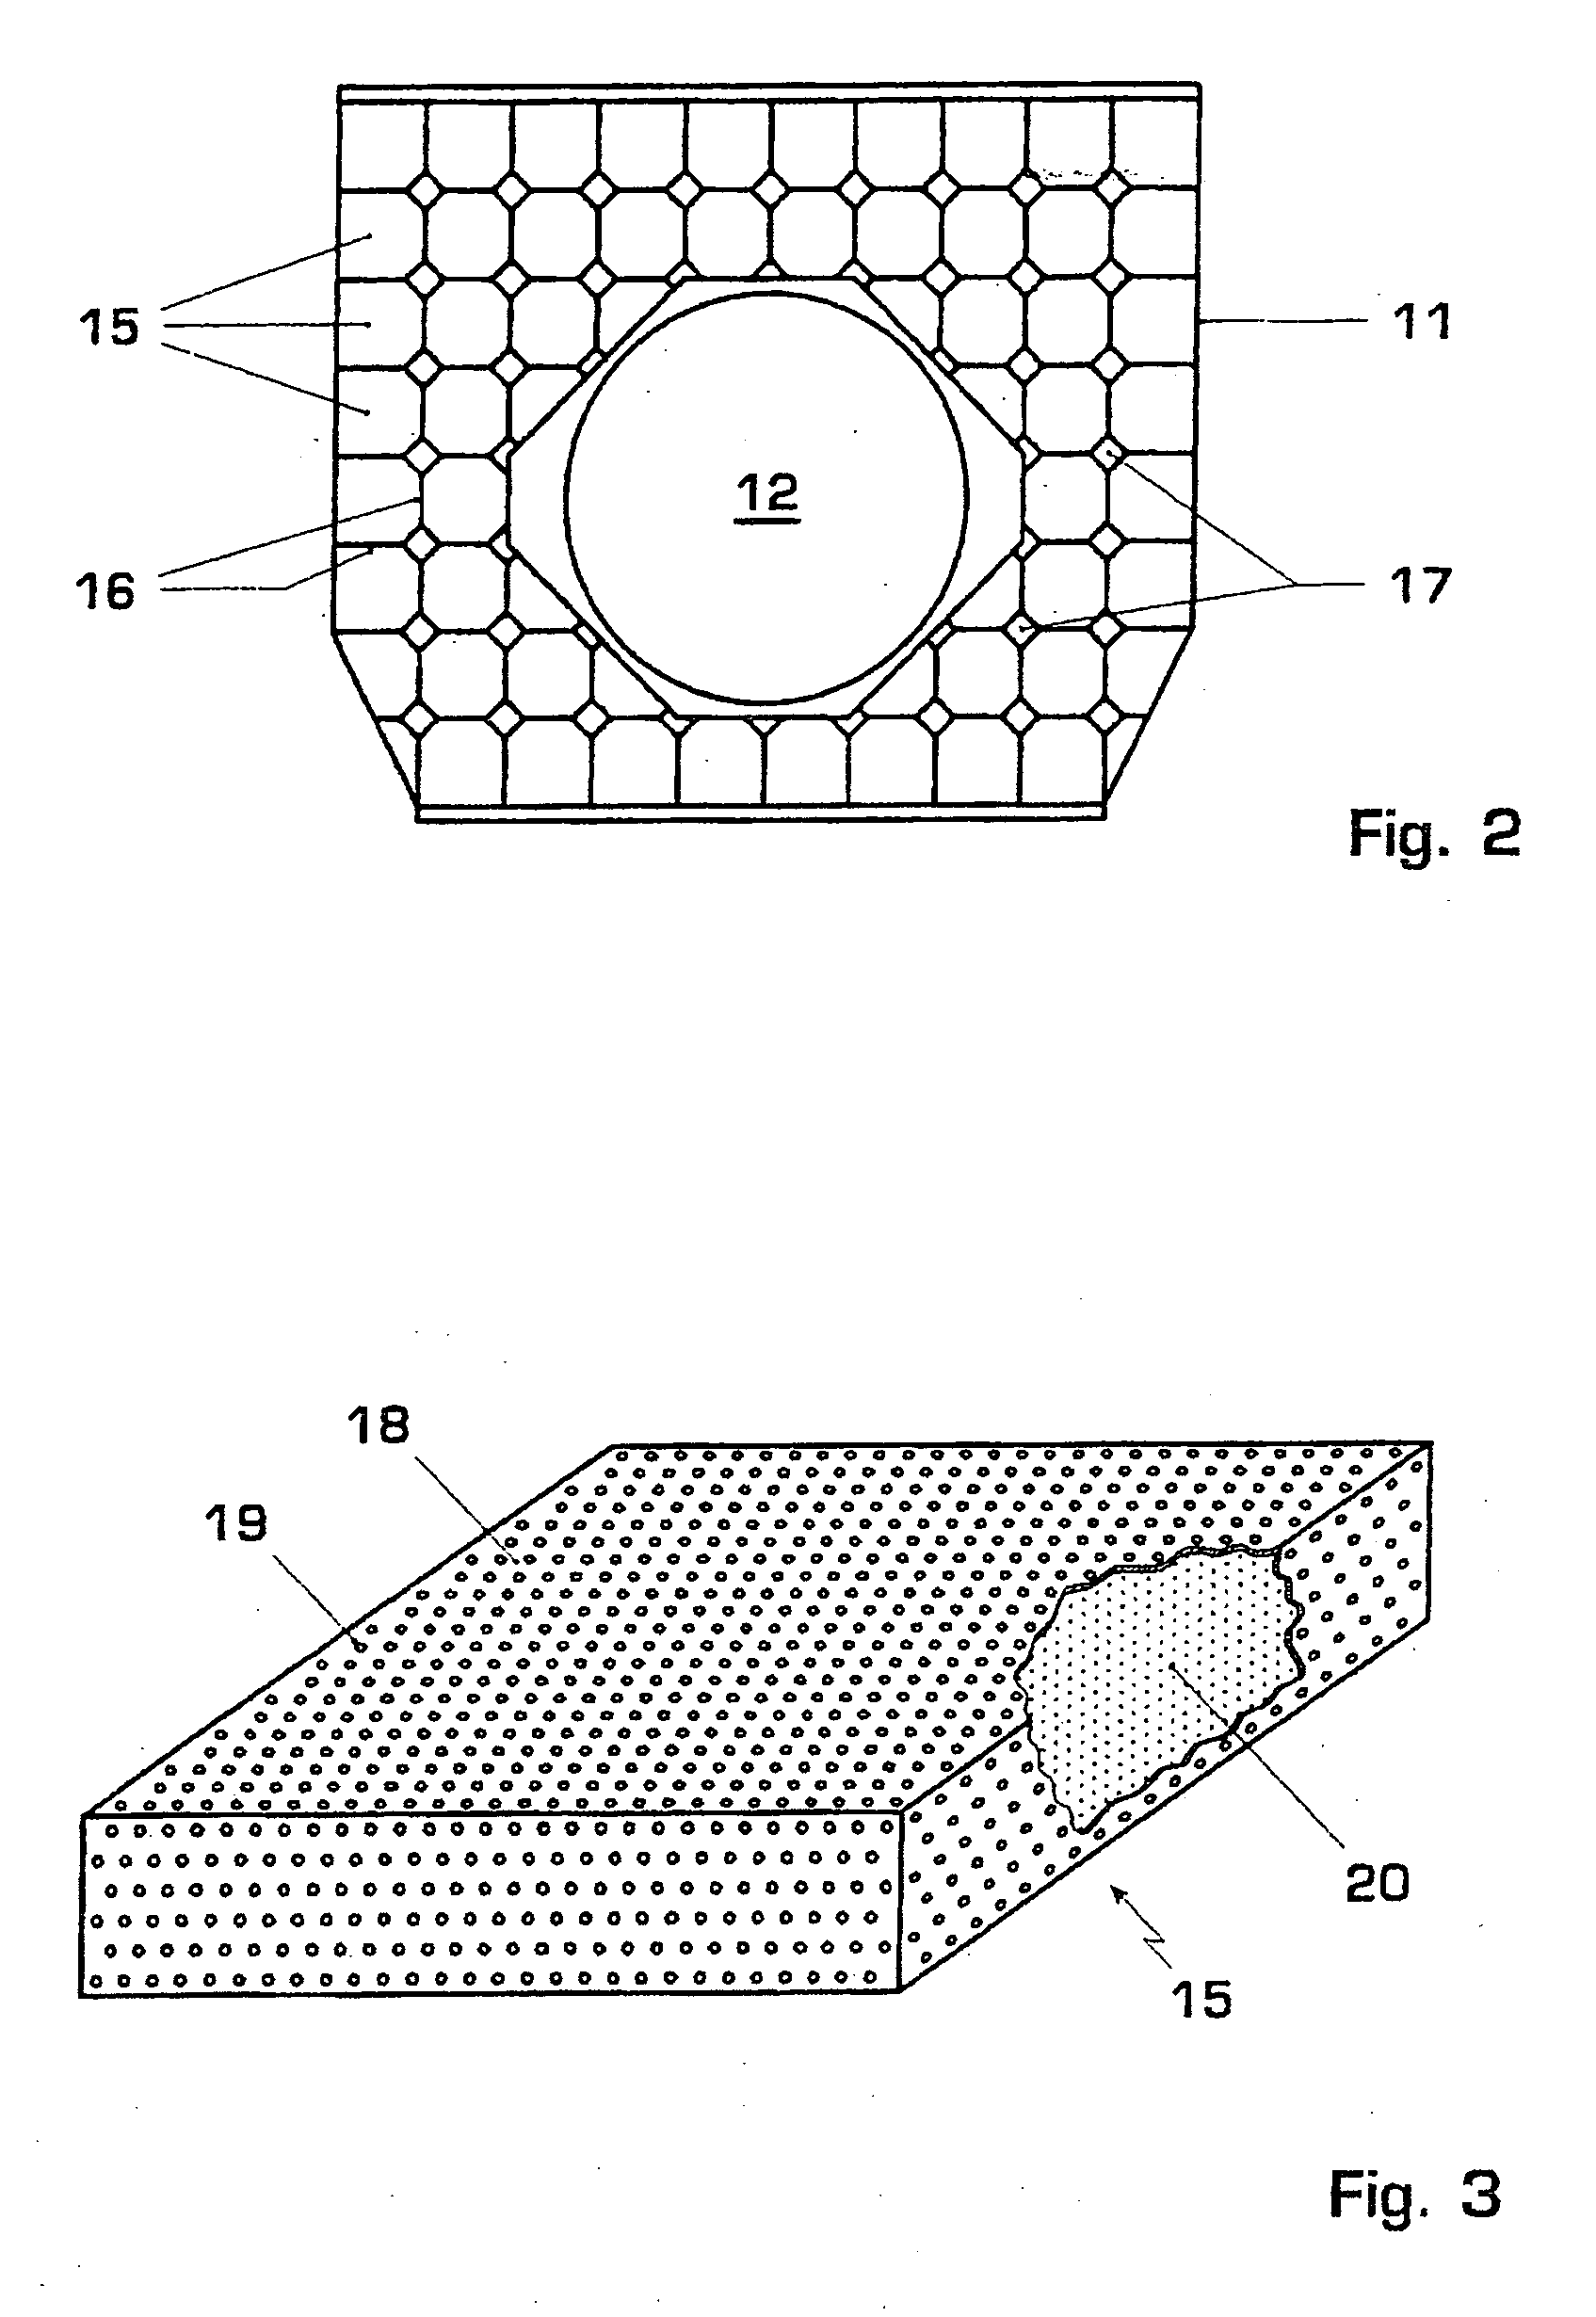 Sound absorber for gas turbine installations